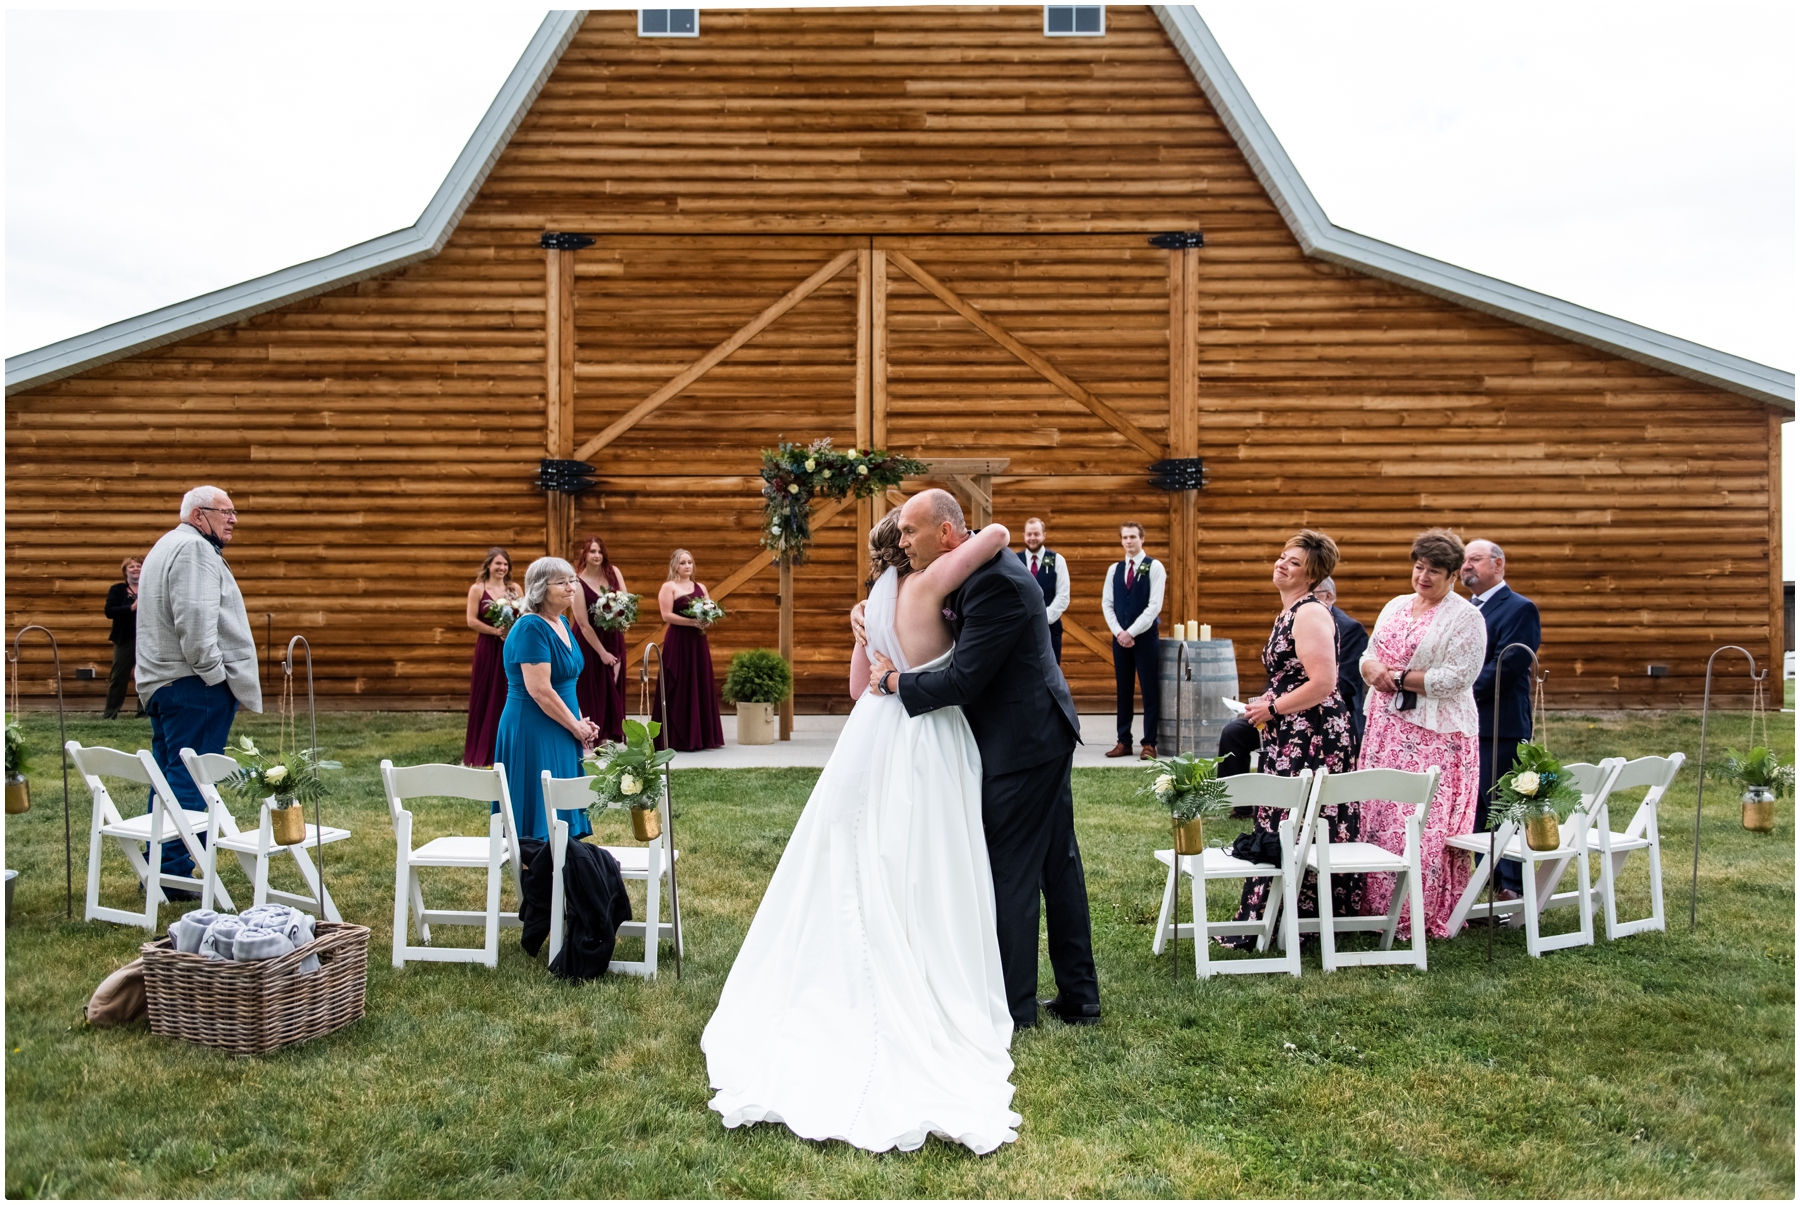 Olds Willow Lane Barn Wedding Ceremony Photography